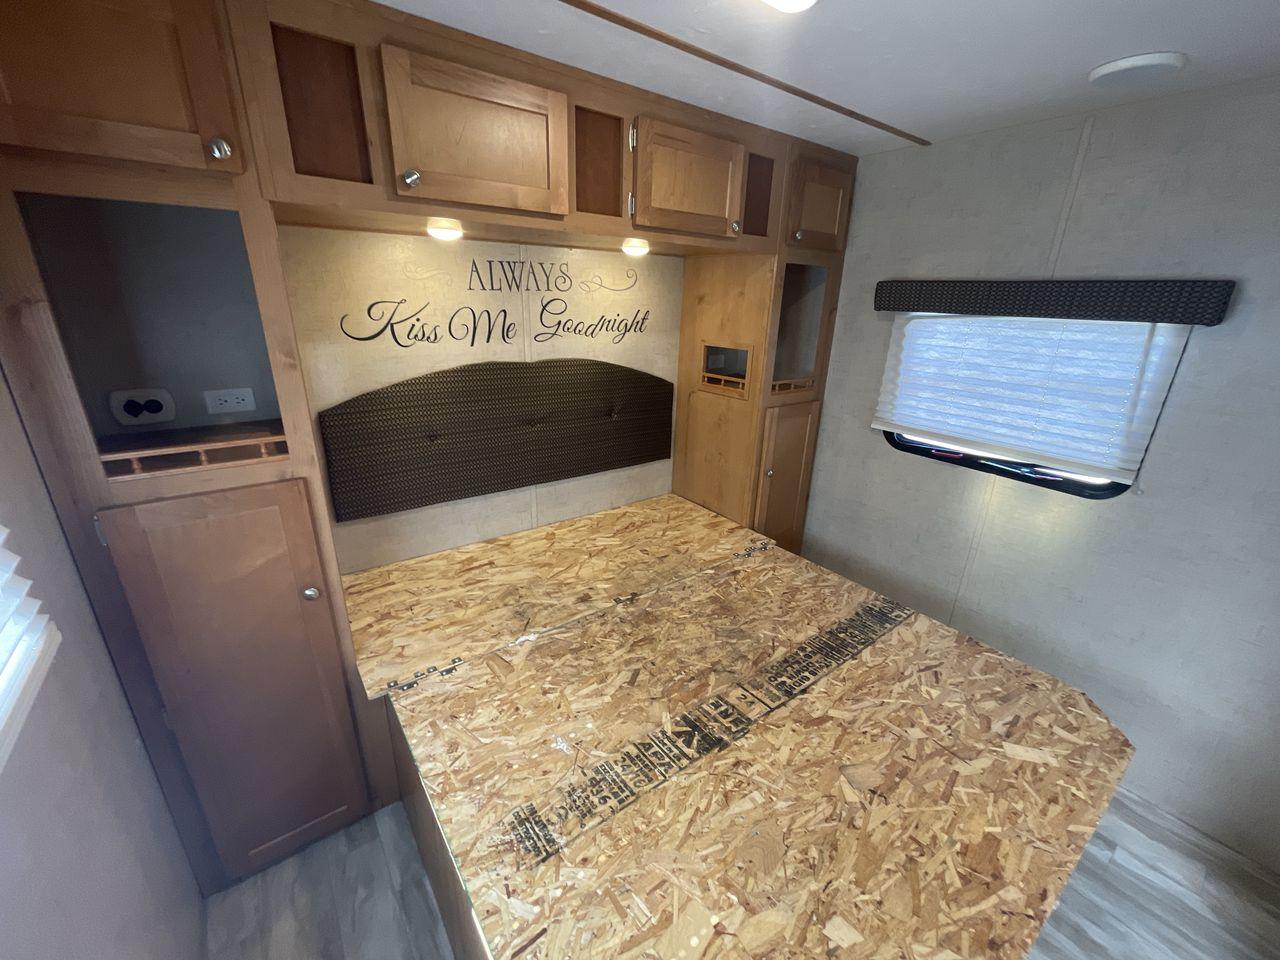 2018 GRAY RIVERSIDE MT MCKINLEY 830FK - (59CCC3223JL) , Length: 32 ft | Dry Weight: 5660 lbs | Slides: 1 transmission, located at 4319 N Main St, Cleburne, TX, 76033, (817) 678-5133, 32.385960, -97.391212 - With so much floor space to spare, the Riverside RV 830FK Mt. McKinley single slide travel trailer is the perfect way to start your next camping trip. This unit measures 32 ft in length, 8 ft in width, and 10.5 ft in height. It has a dry weight of 5,660 lbs., with a cargo capacity of 1,975 lbs., - Photo #17